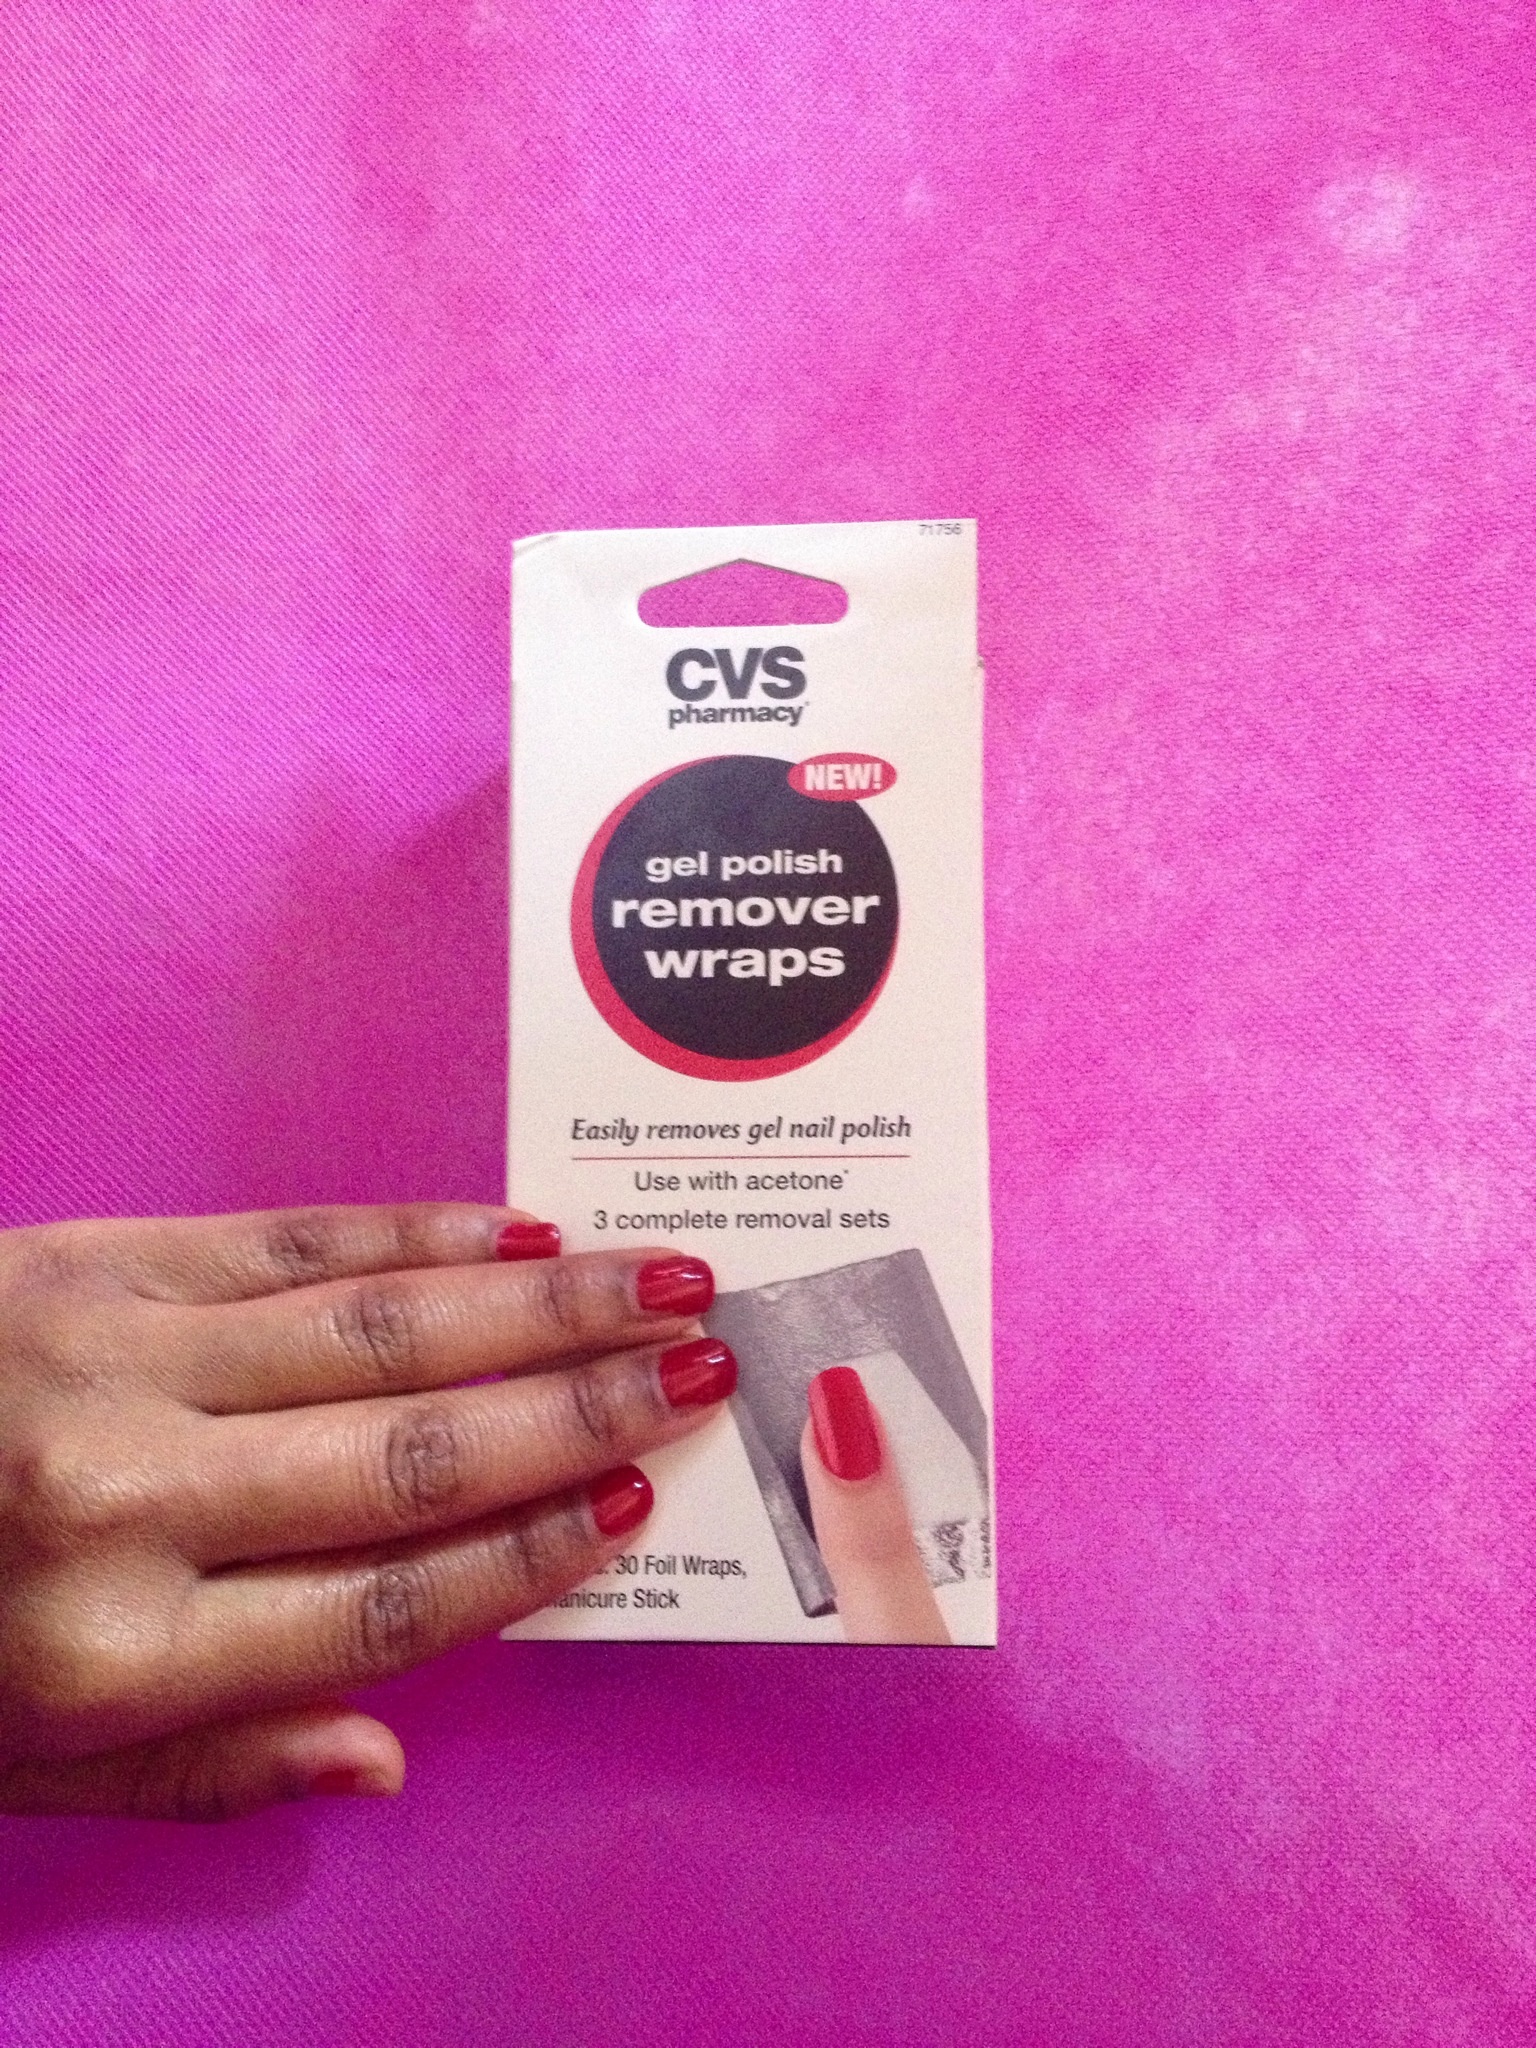 How to remove gel polish with cvs gel polish remover - B+C Guides